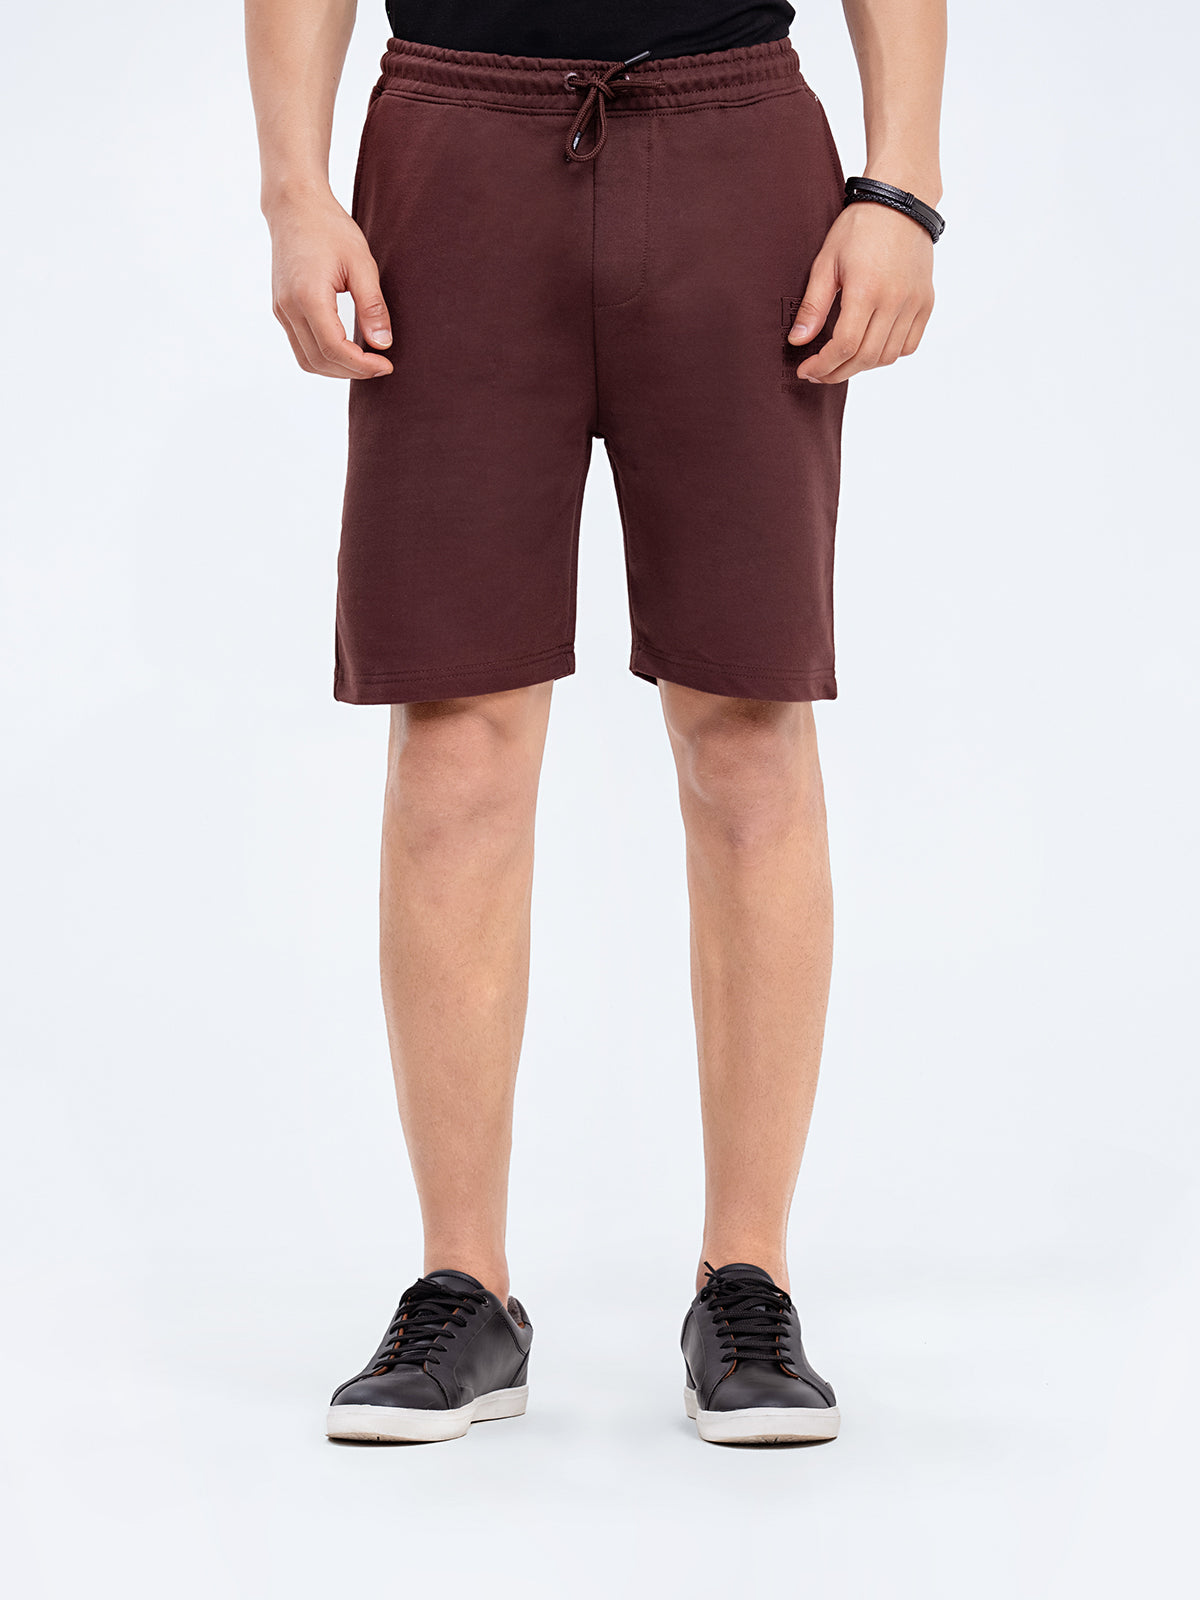 Regular Fit French Terry Shorts - FMBSK24-011